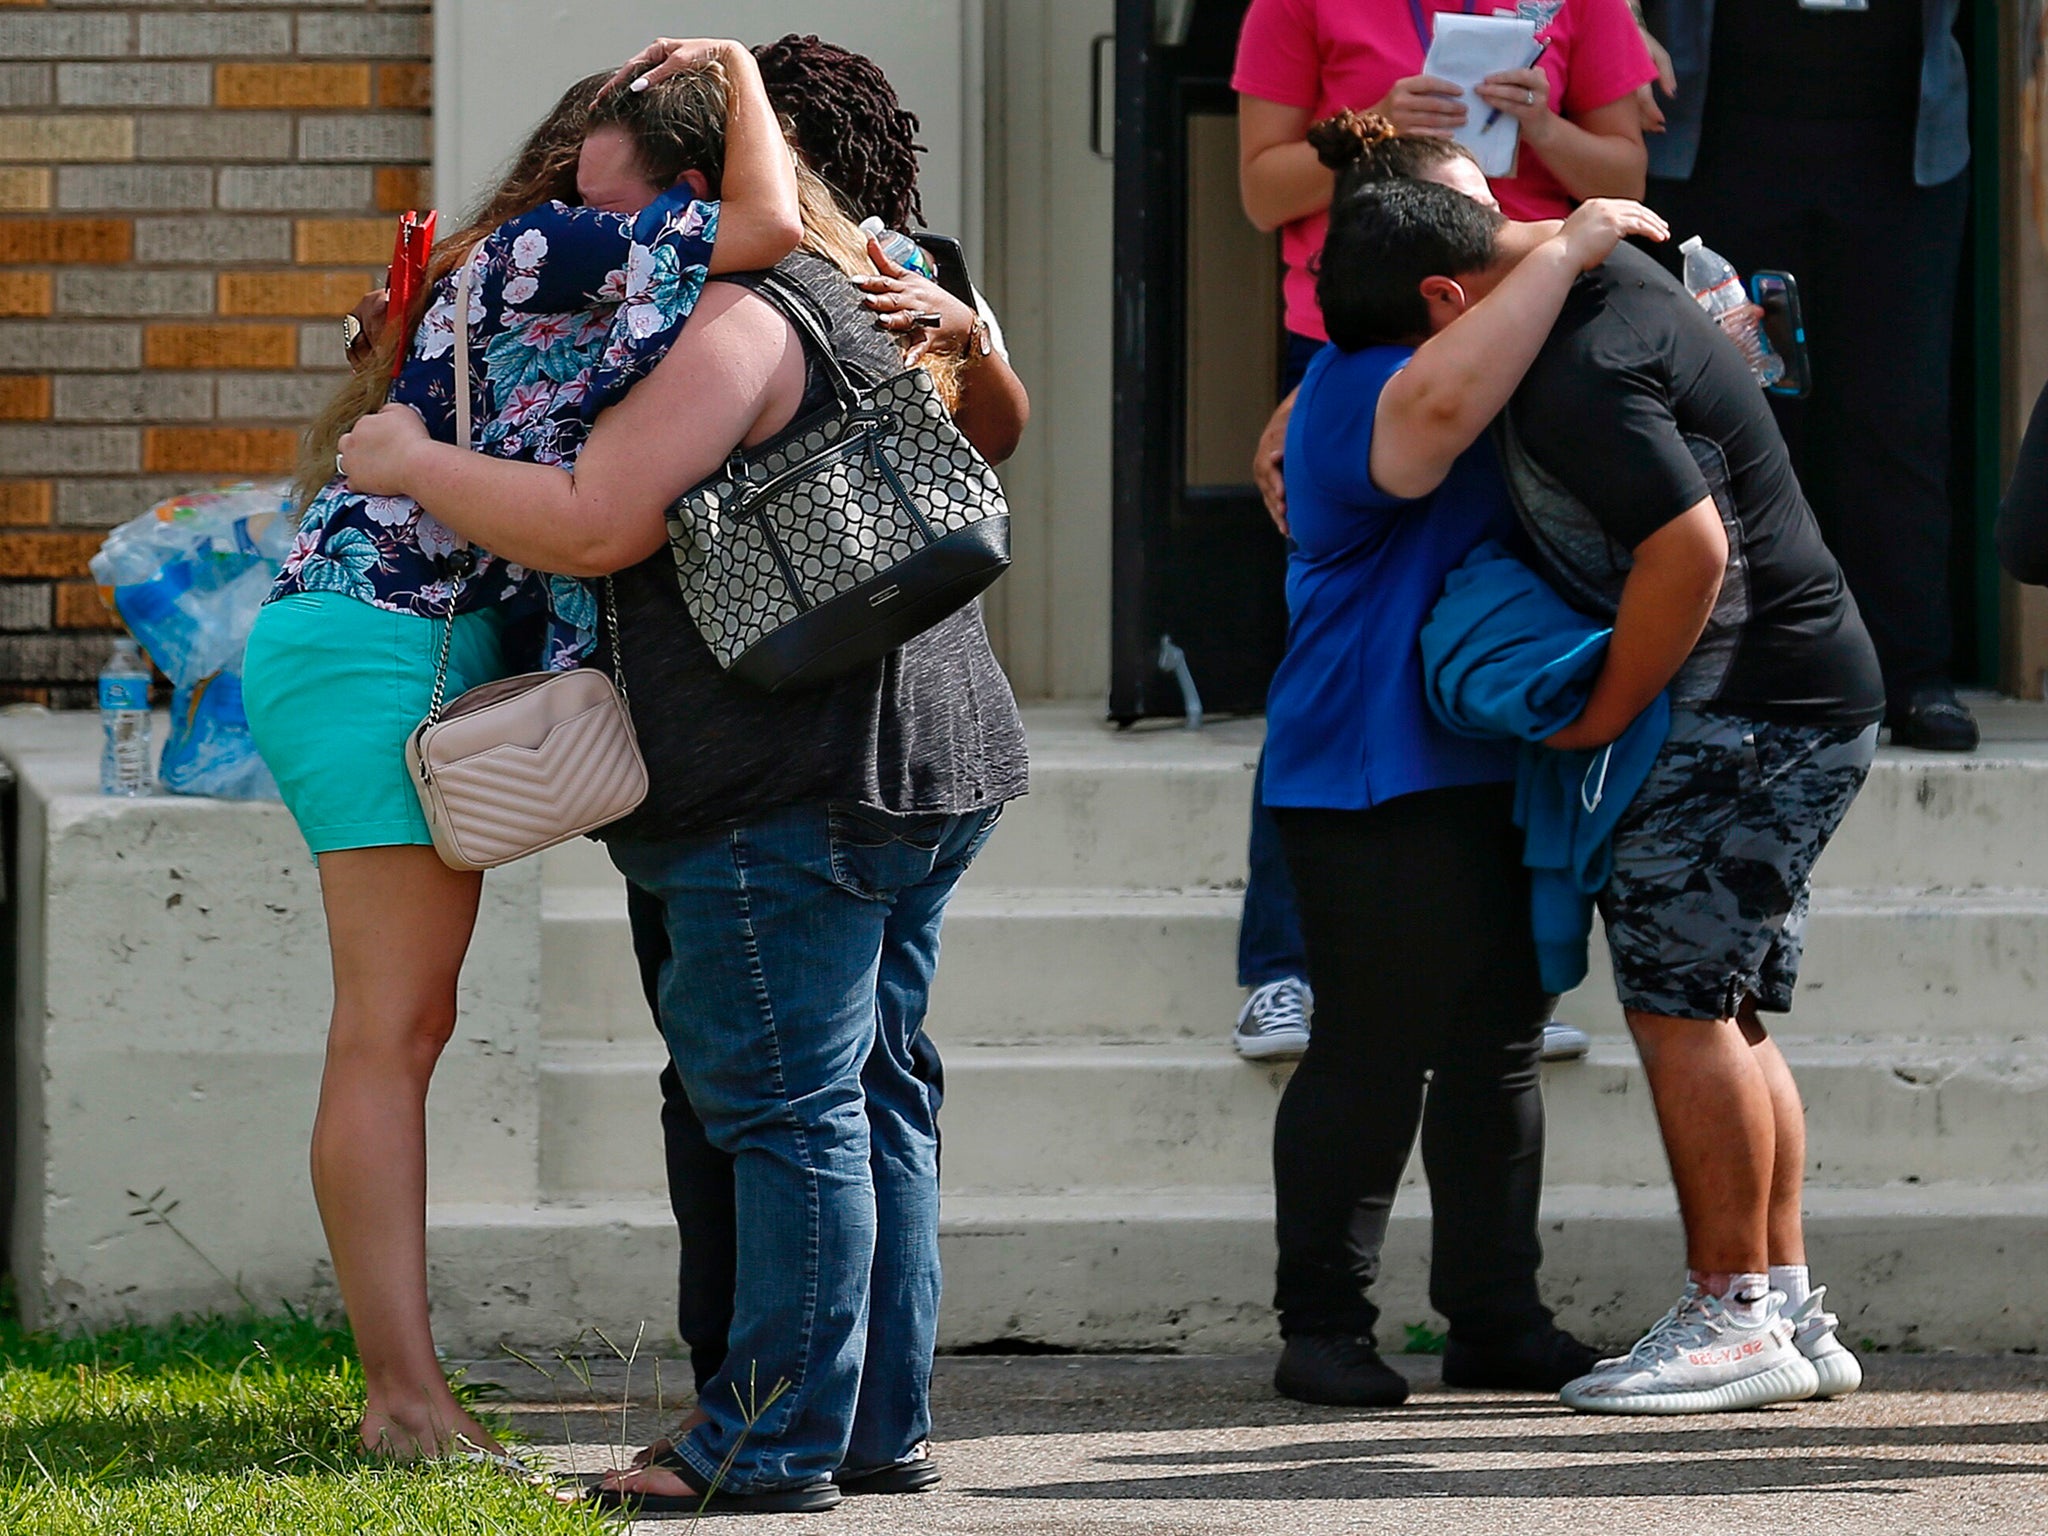 As many as 10 people were killed in the shooting, officials have said